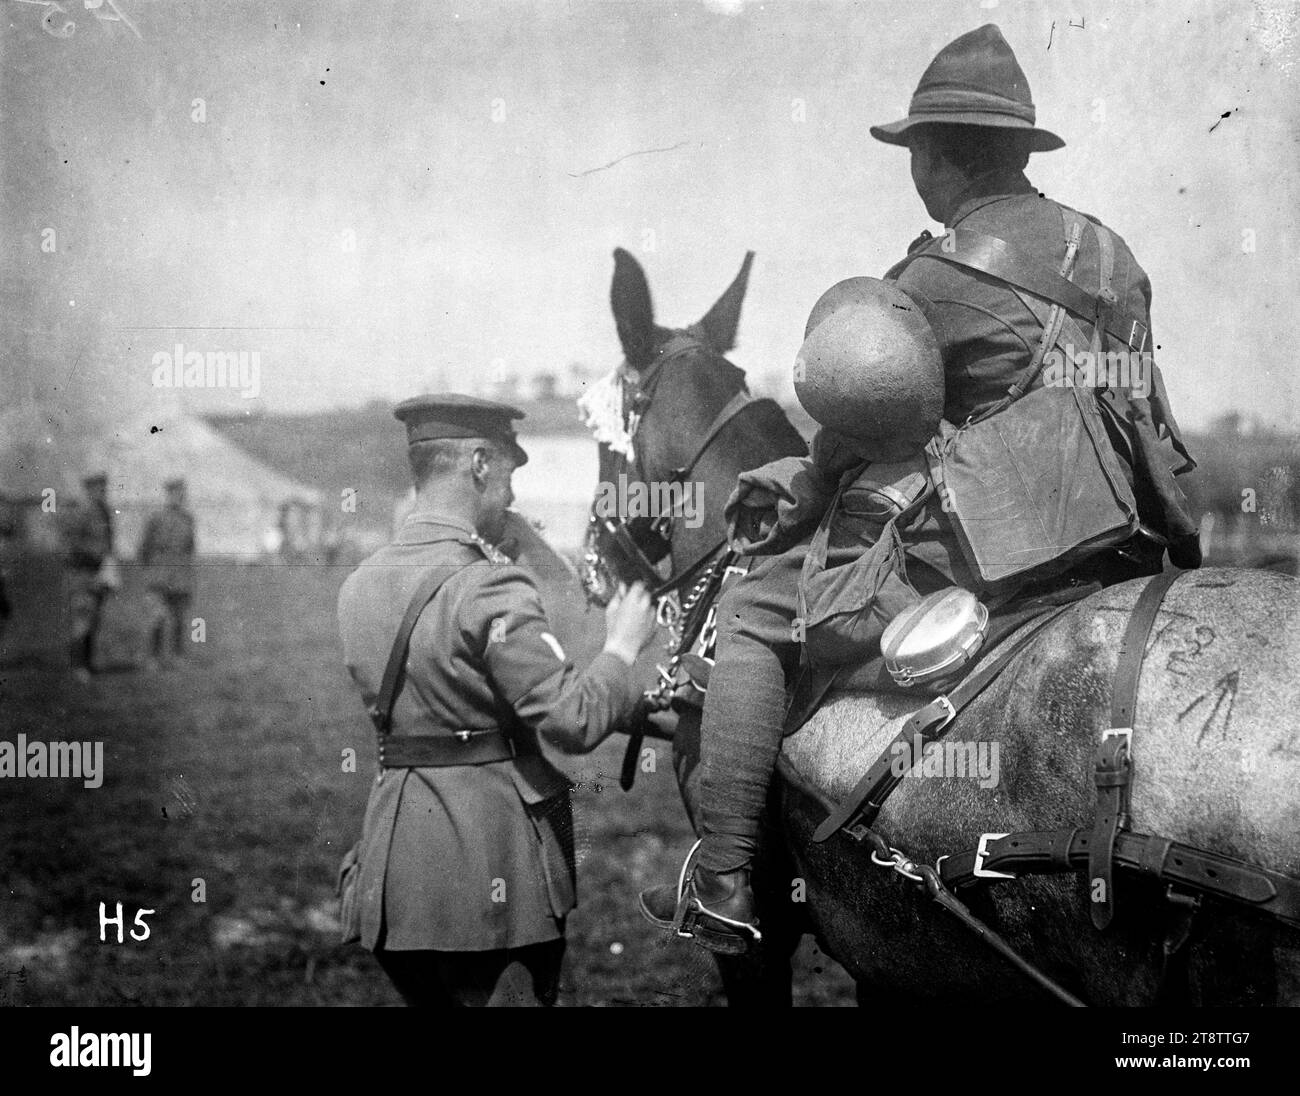 Winners of Class III (New Zealand Field Ambulance) at the New Zealand Division horse show, Winners of Class III, 3rd New Zealand Field Ambulance, receive a ribbon at the New Zealand Horse Show, Western Front. Photograph taken 1917 Stock Photo